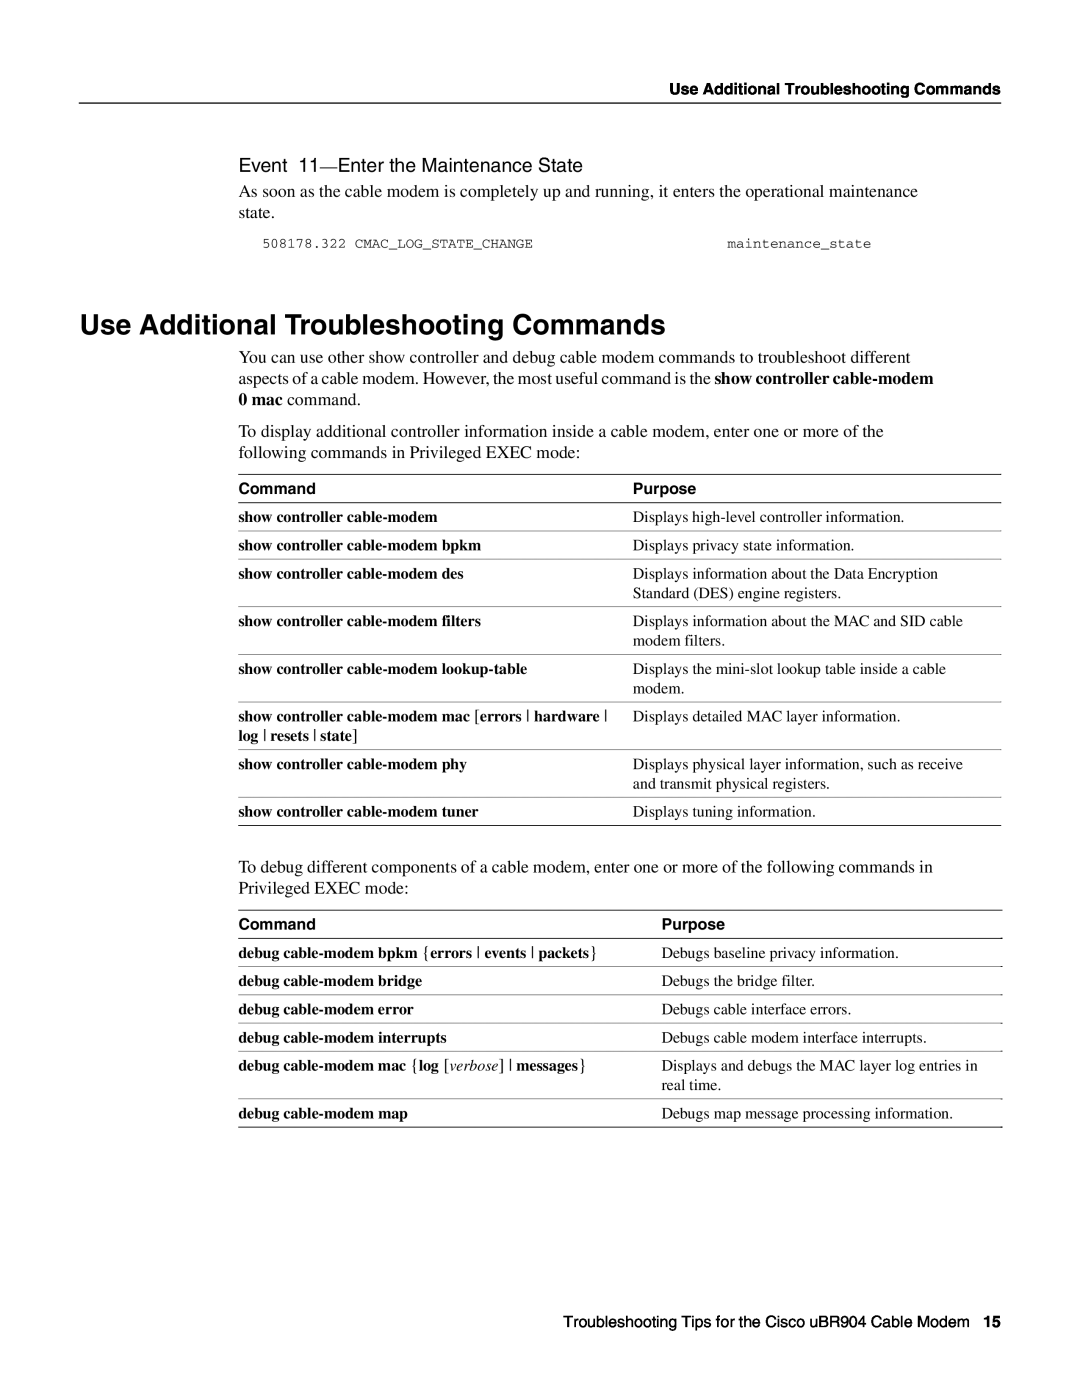 Cisco Systems UBR904 manual Use Additional Troubleshooting Commands, Event 11-Enter the Maintenance State 